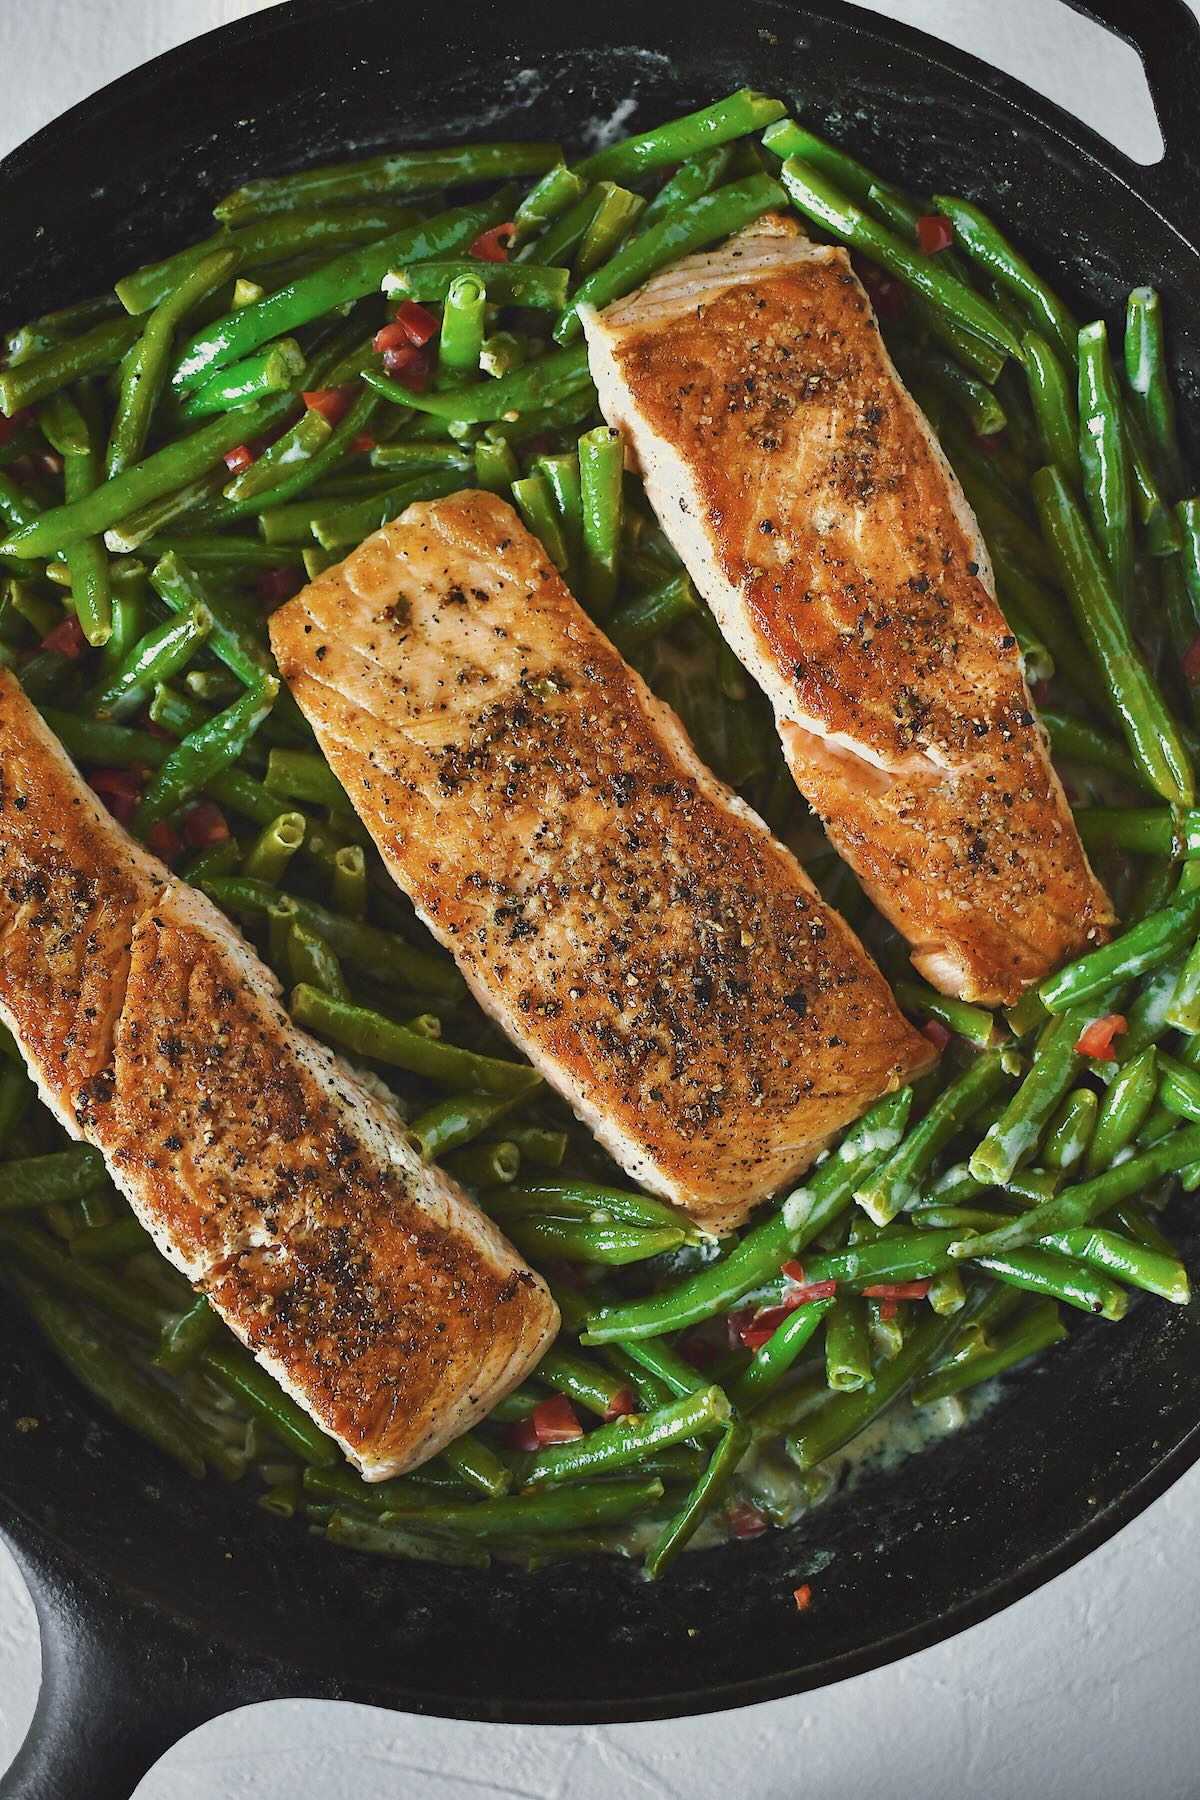 Pan Seared Salmon fillets nestled into some sauteed green beans.